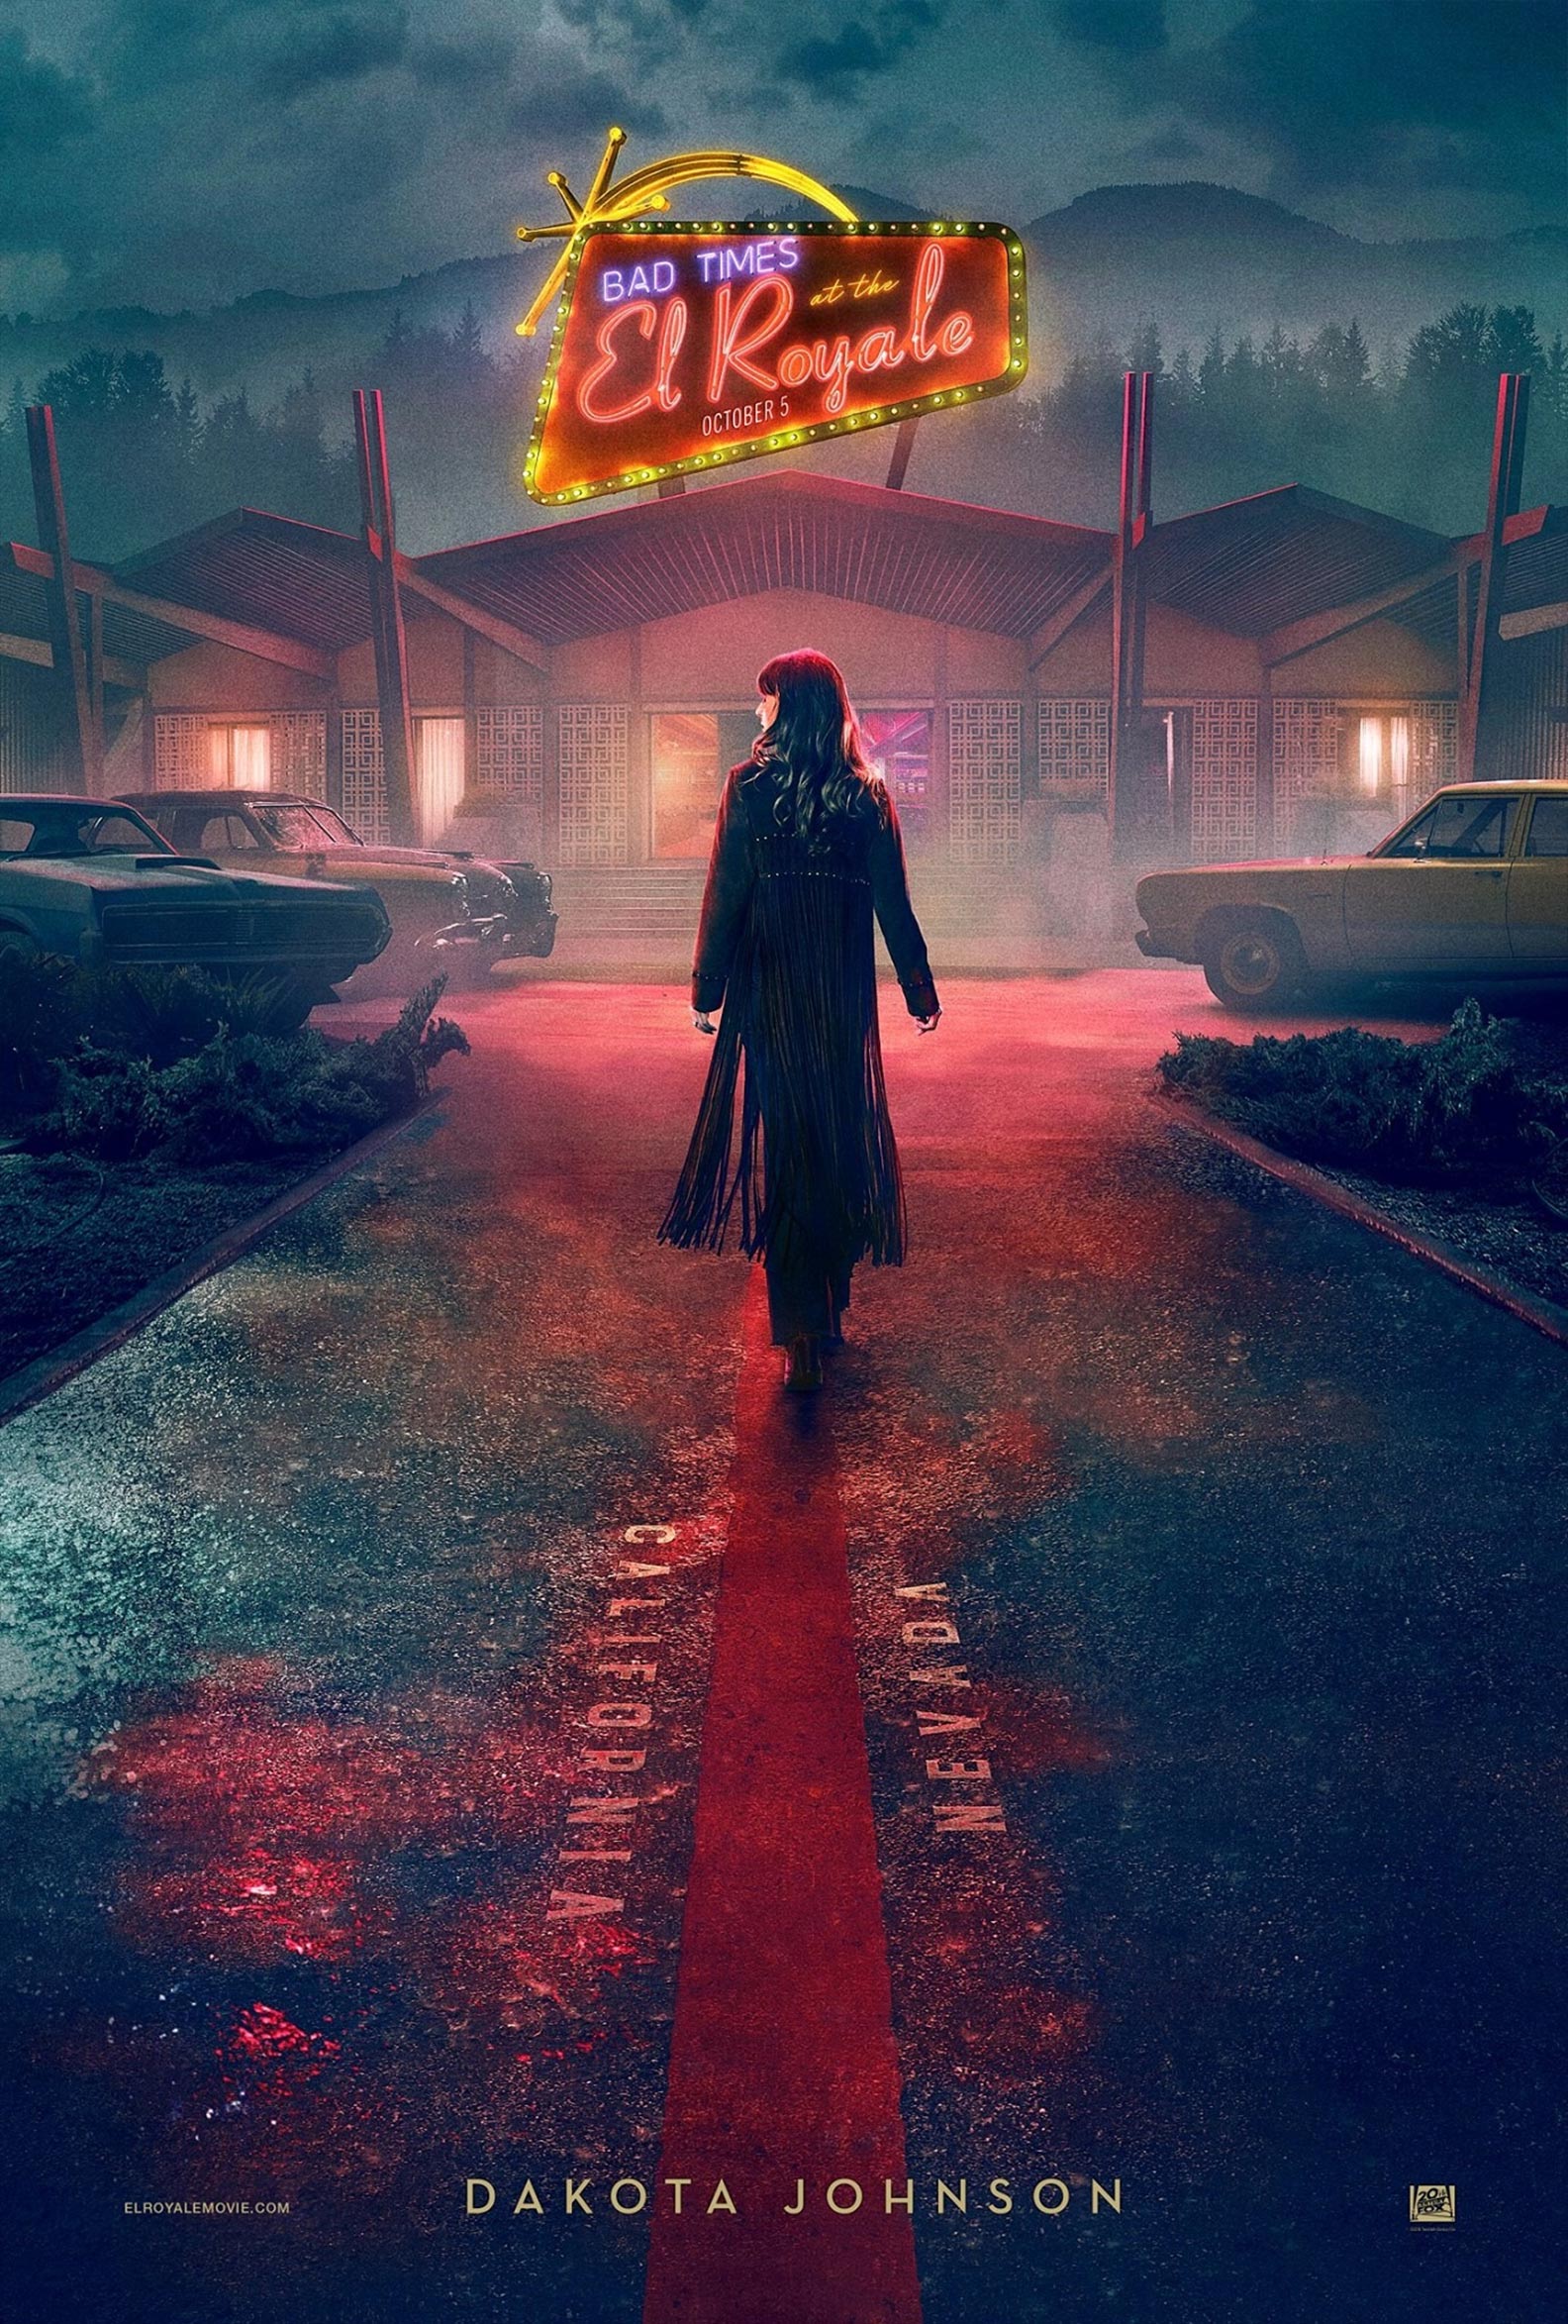 Is The El Royale Real